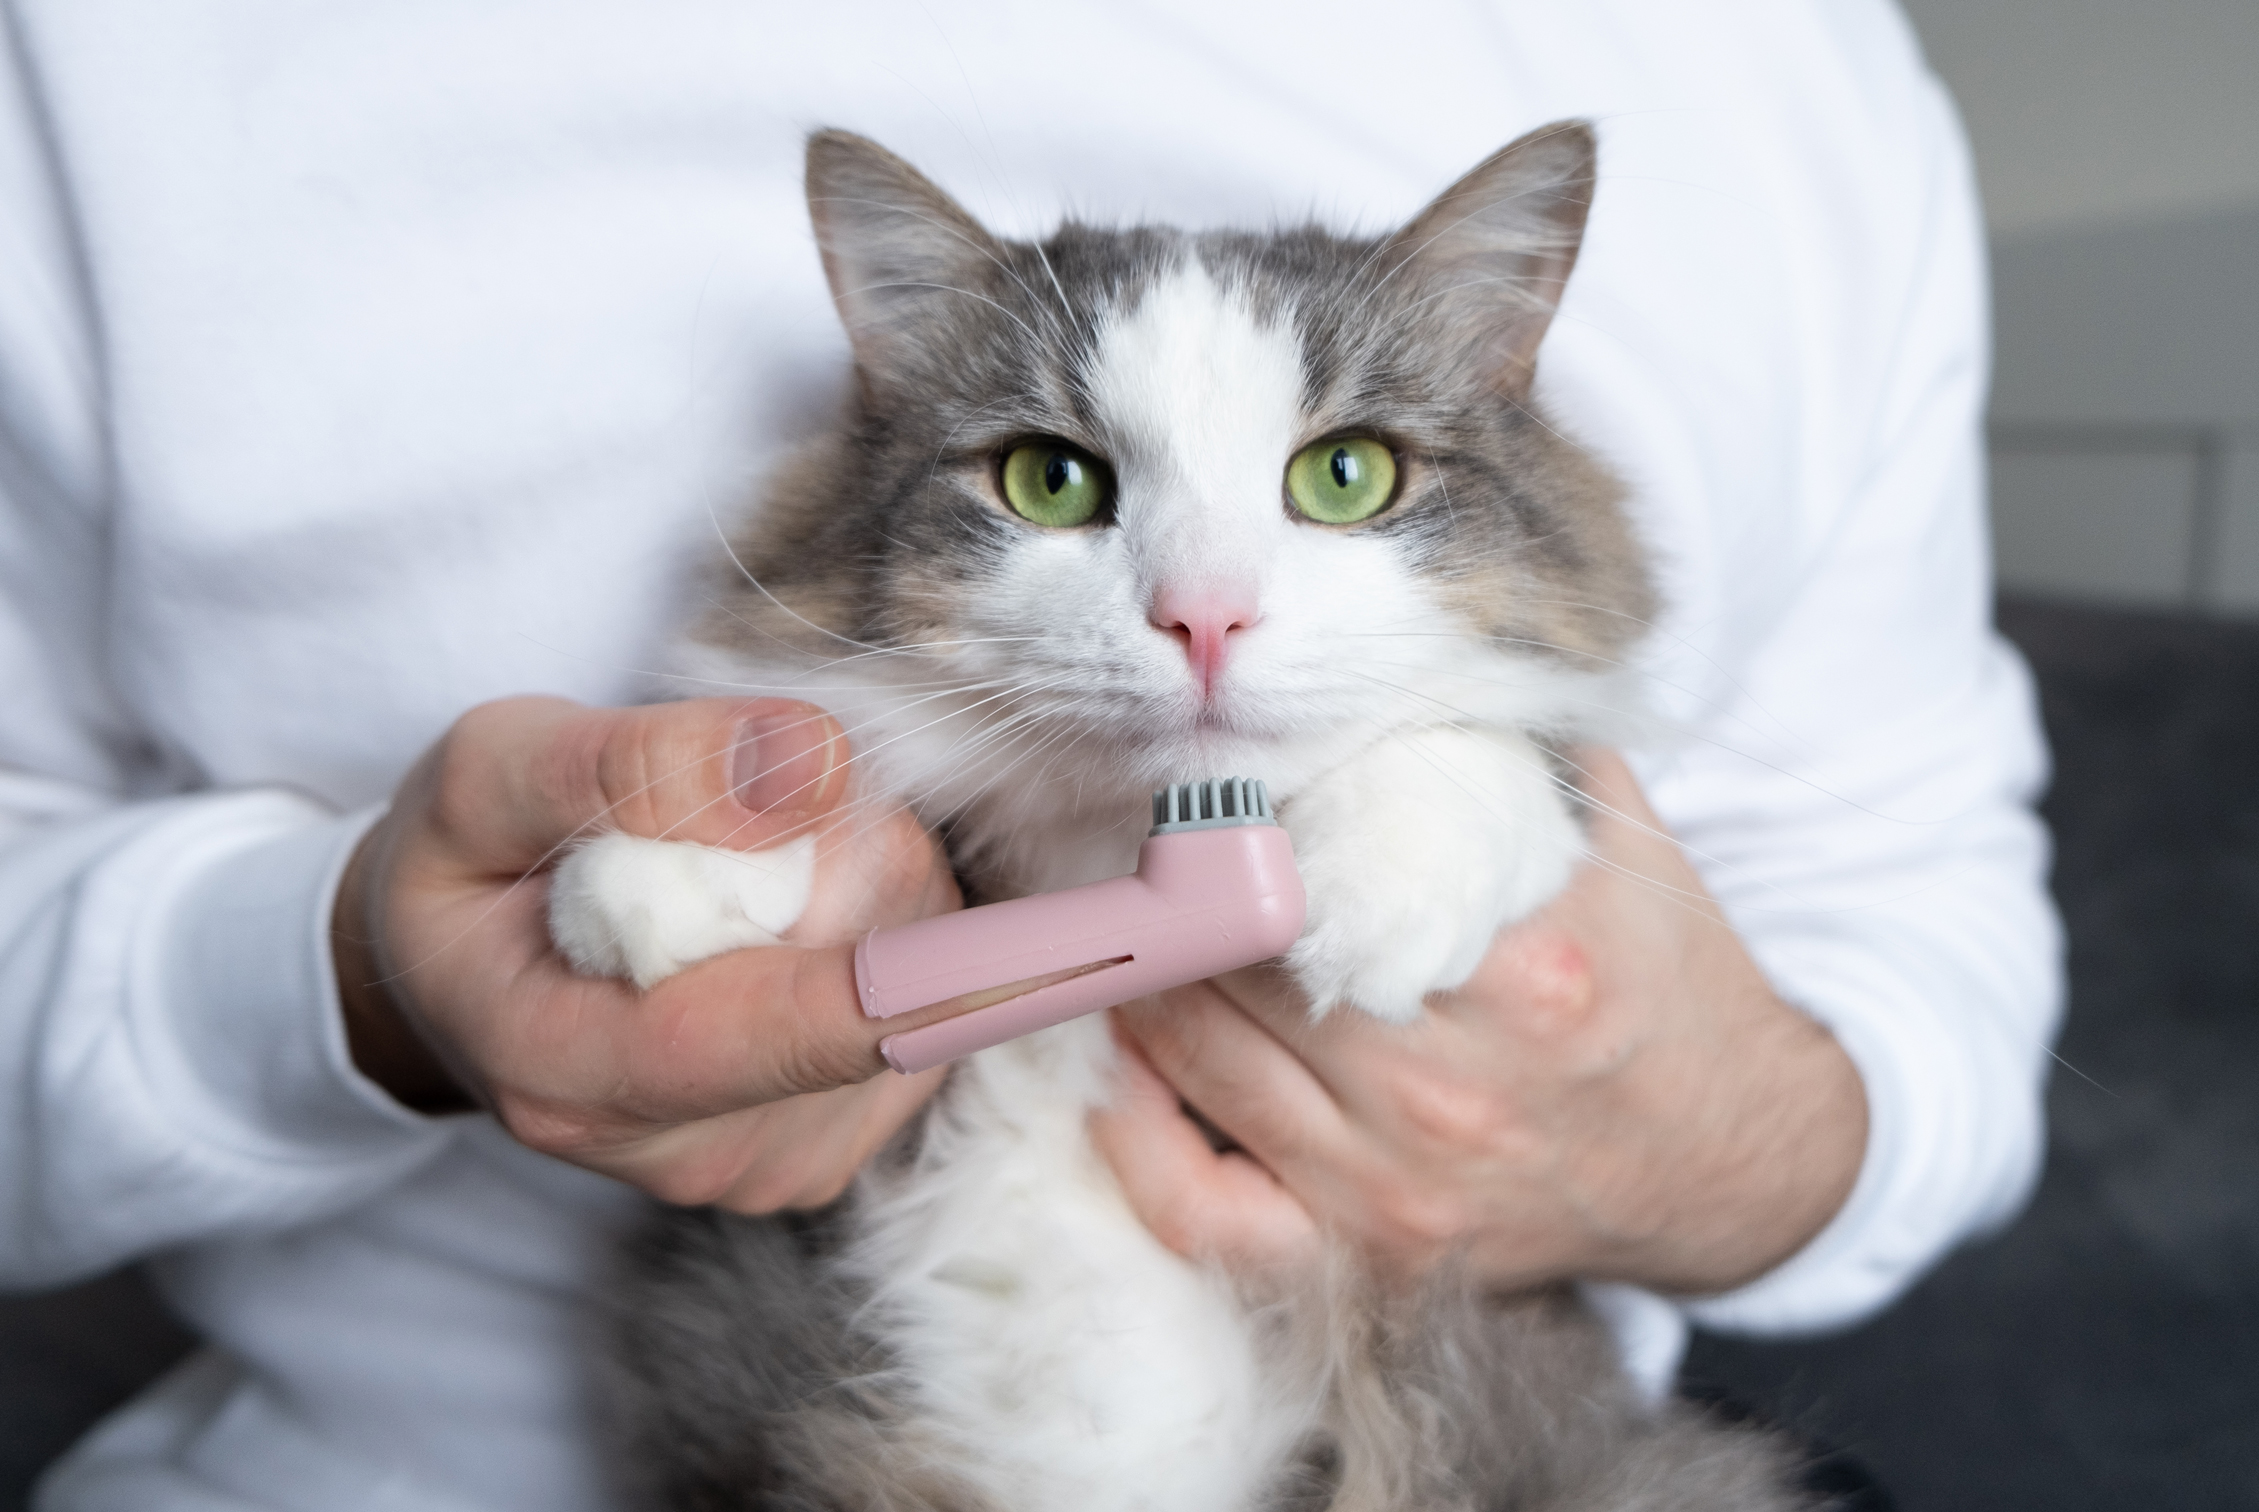 Pet Dental Insurance: What Does It Cover?